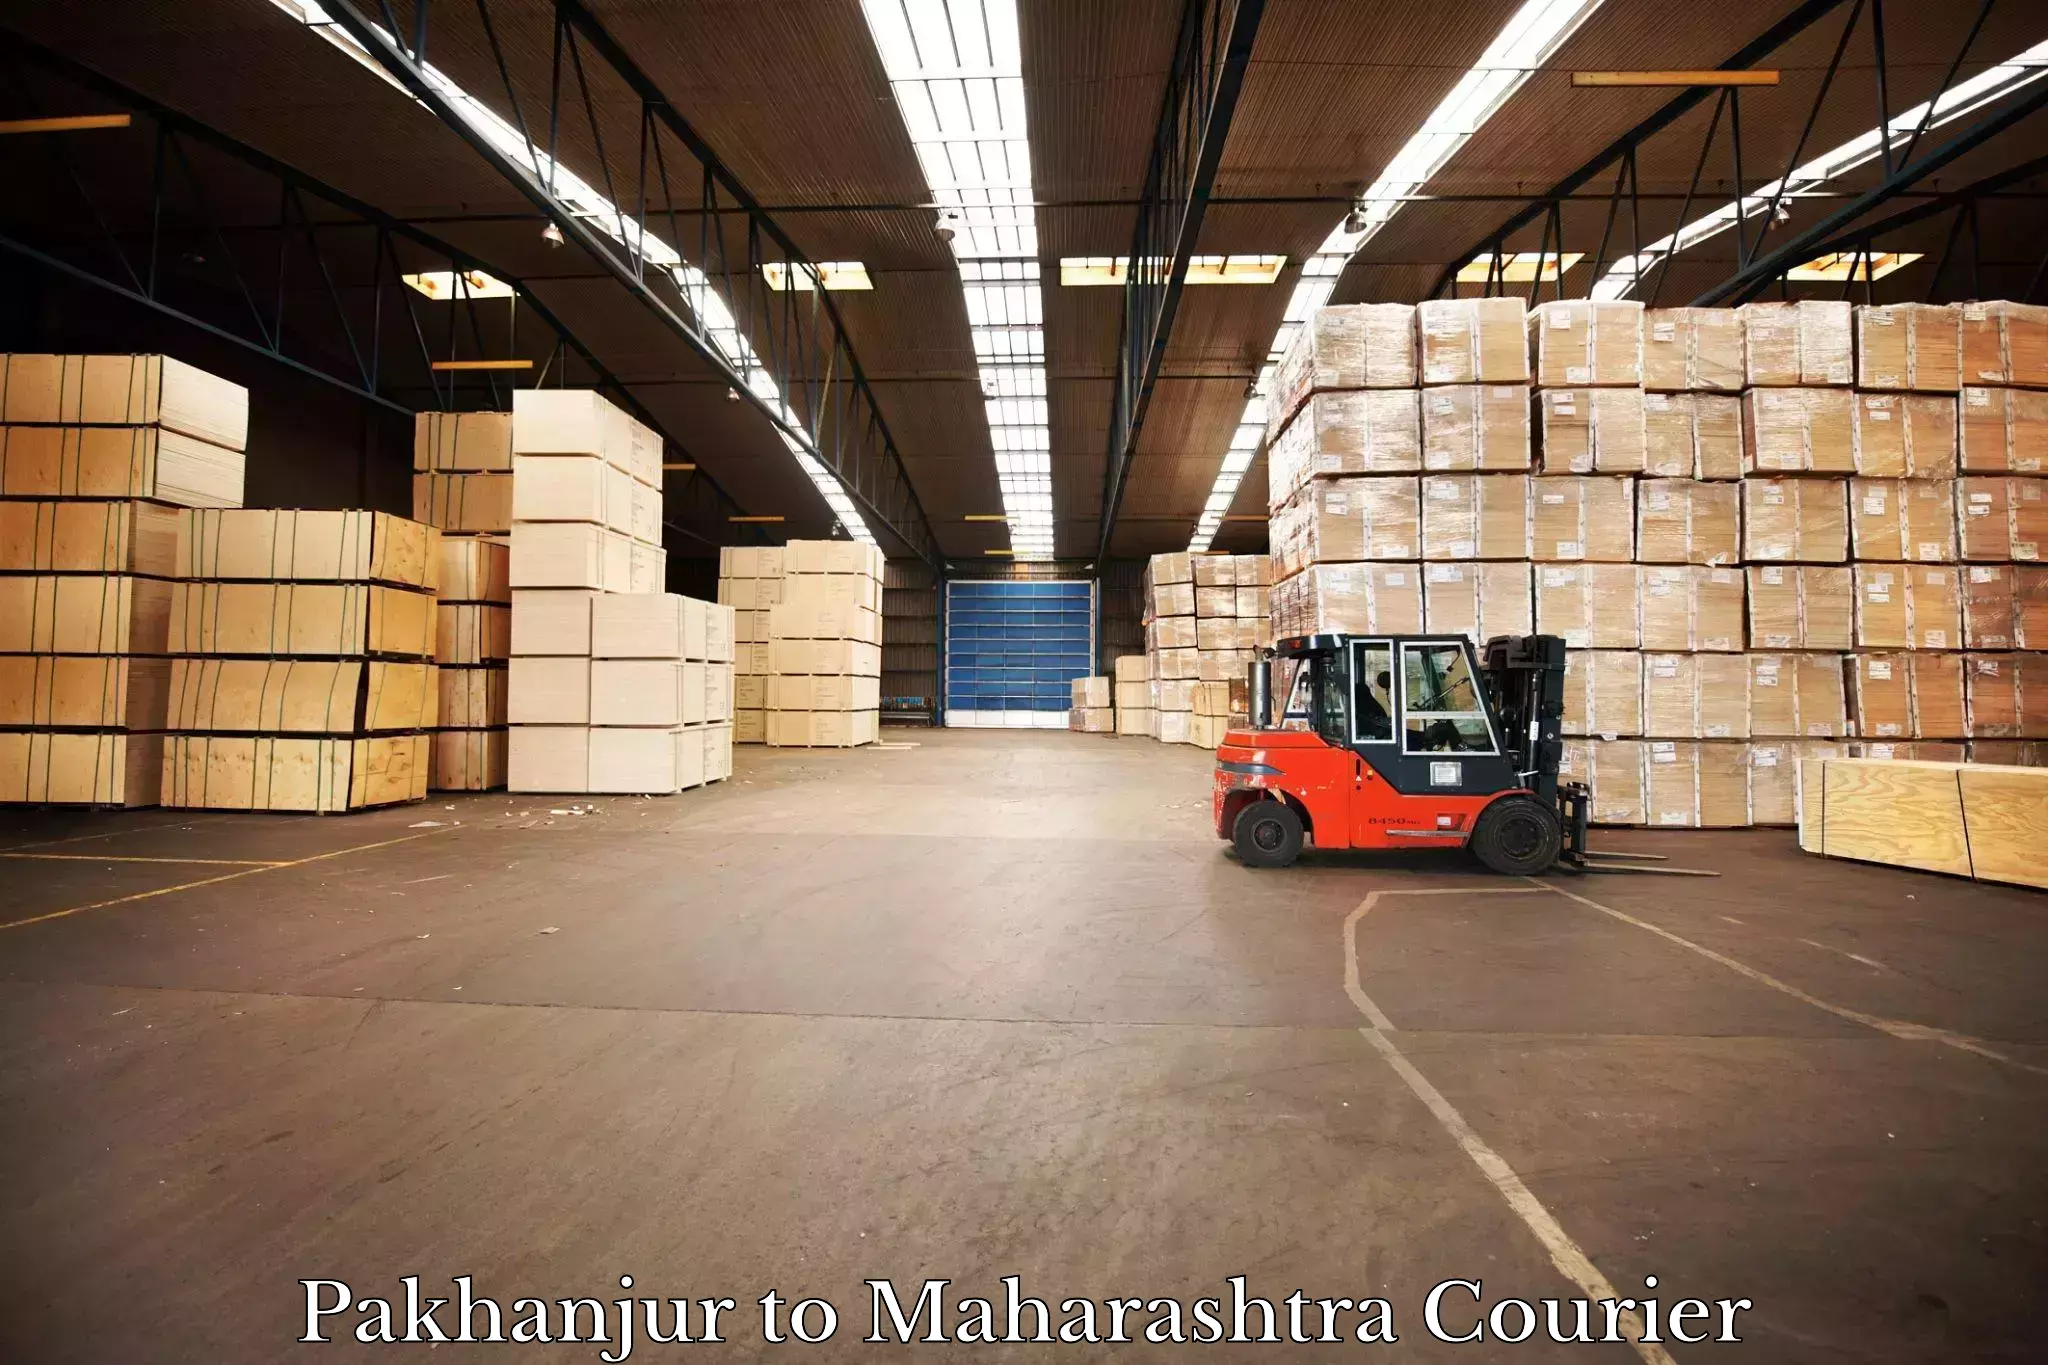 24-hour courier services in Pakhanjur to Maharashtra